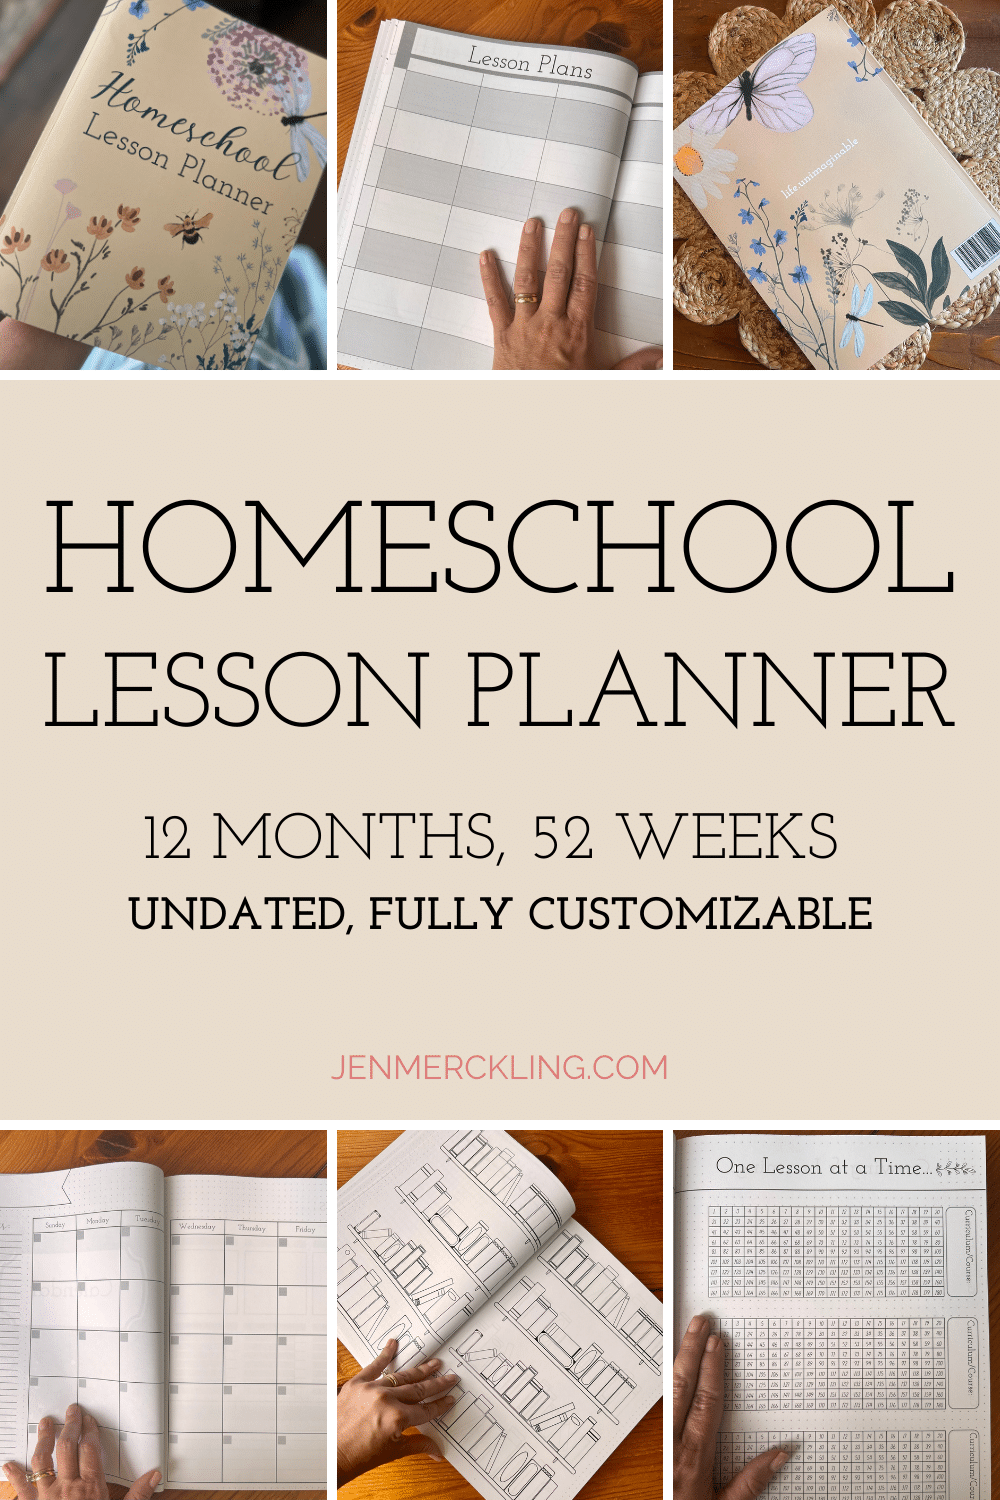 Homeschool Lesson Planner views of cover & inside